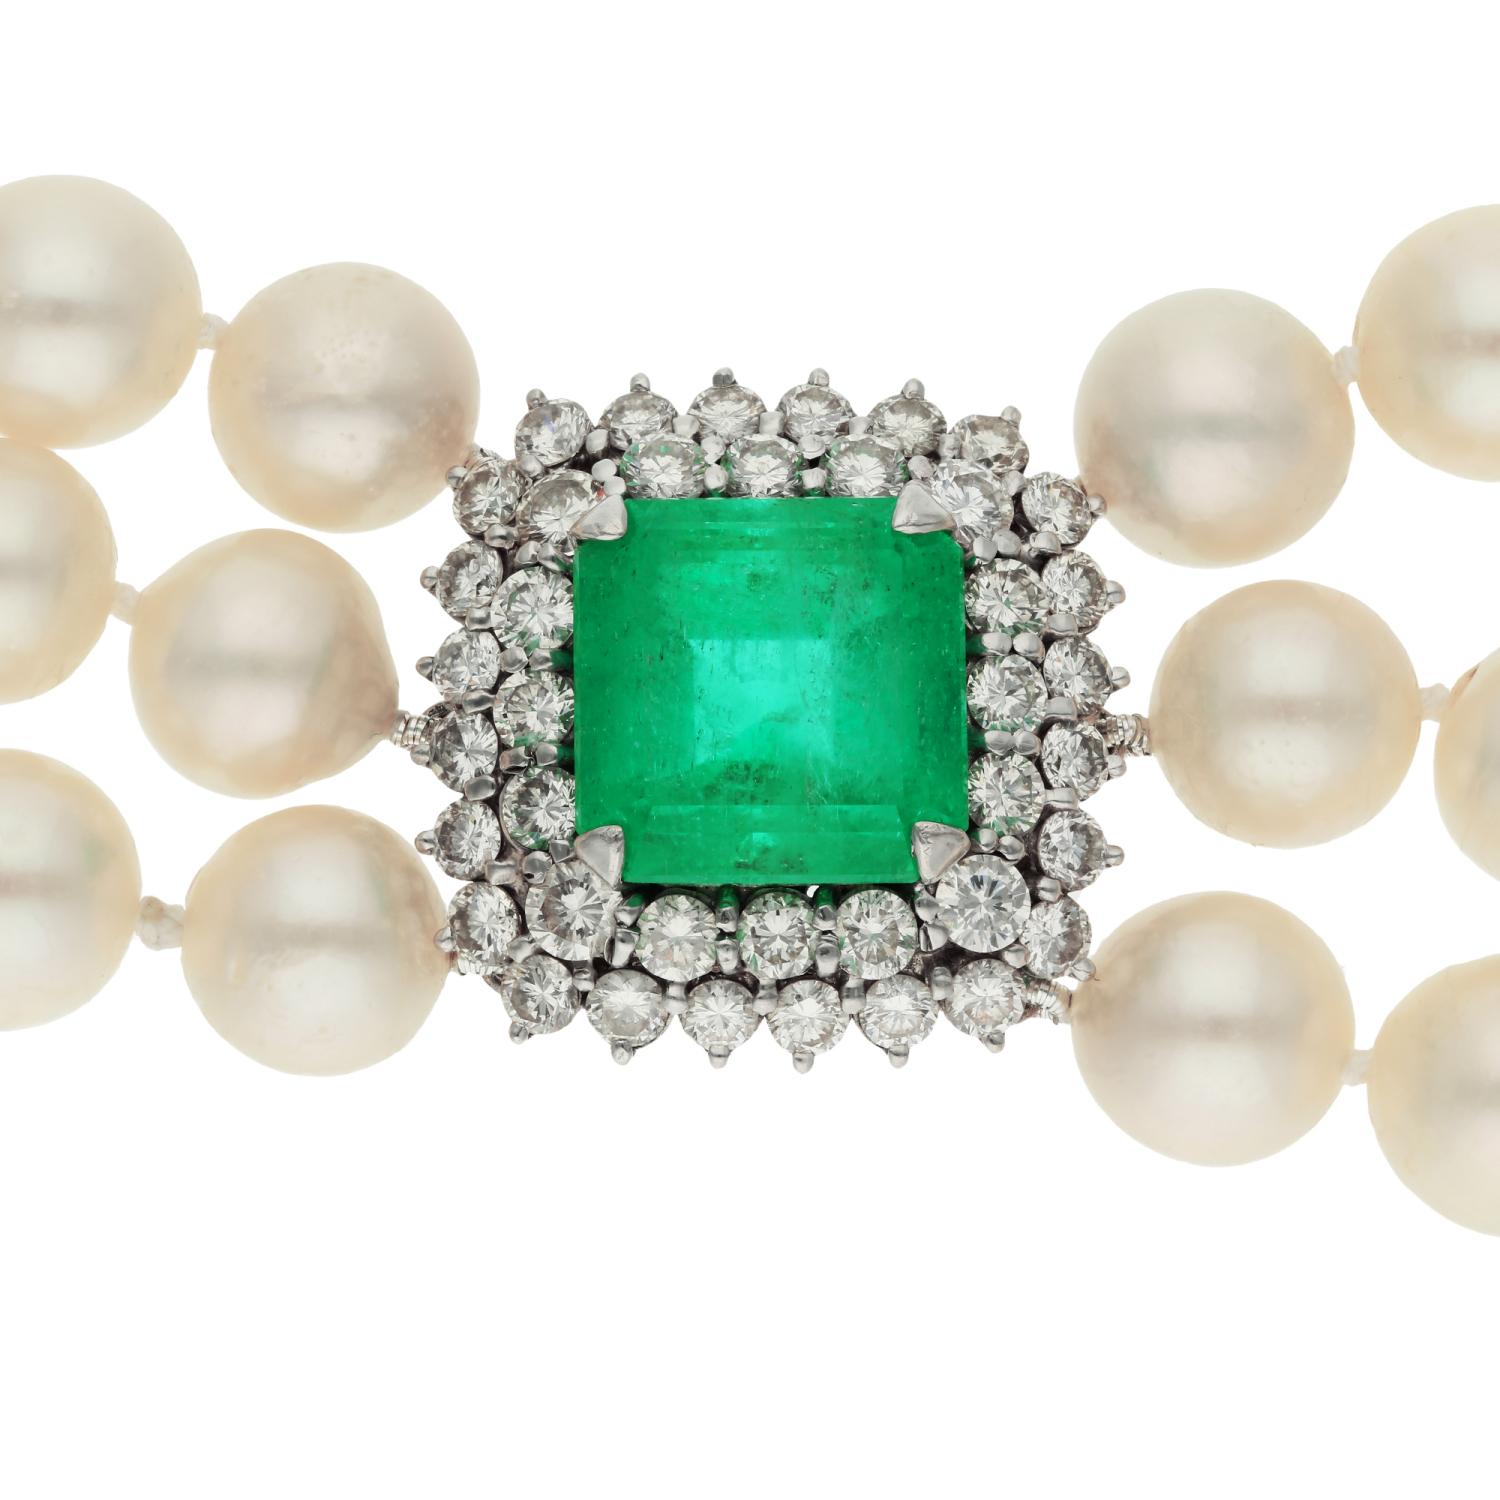 18ct White Gold 9ct Emerald, 2.8ct Diamond & Three Strand Cultured Pearl Choker Necklace 

This Pre-loved Emerald, Diamond, &Cultured Pearl Triple Strand Choker exudes timeless elegance. At the heart of this exquisite piece is a rectangular-cut